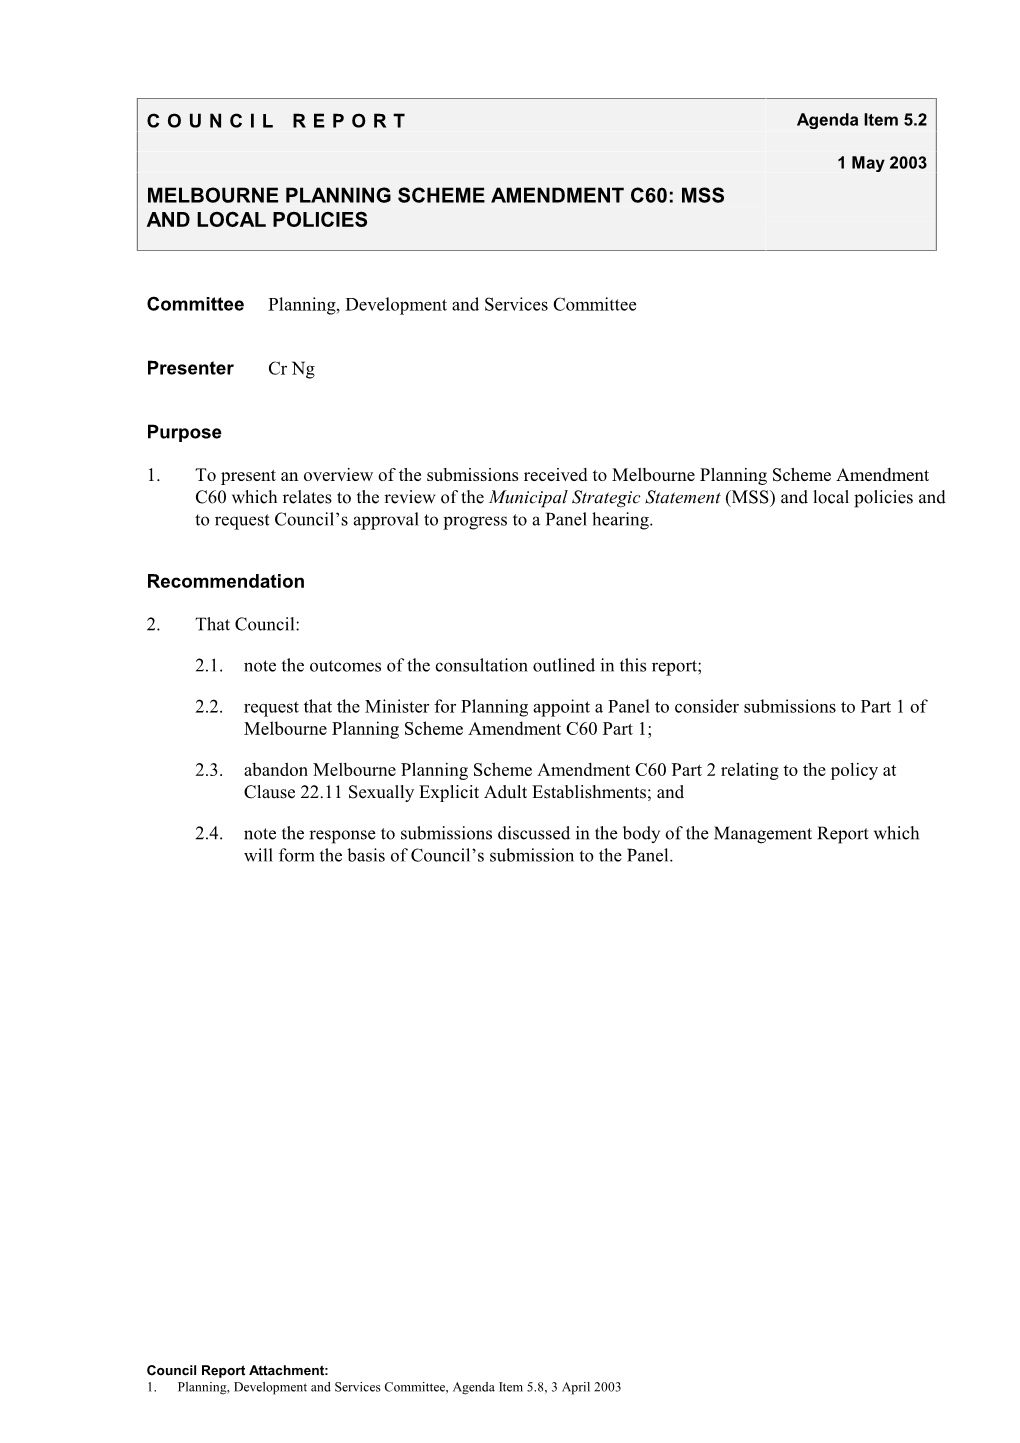 Melbourne Planning Scheme Amendment C60: Mss and Local Policies